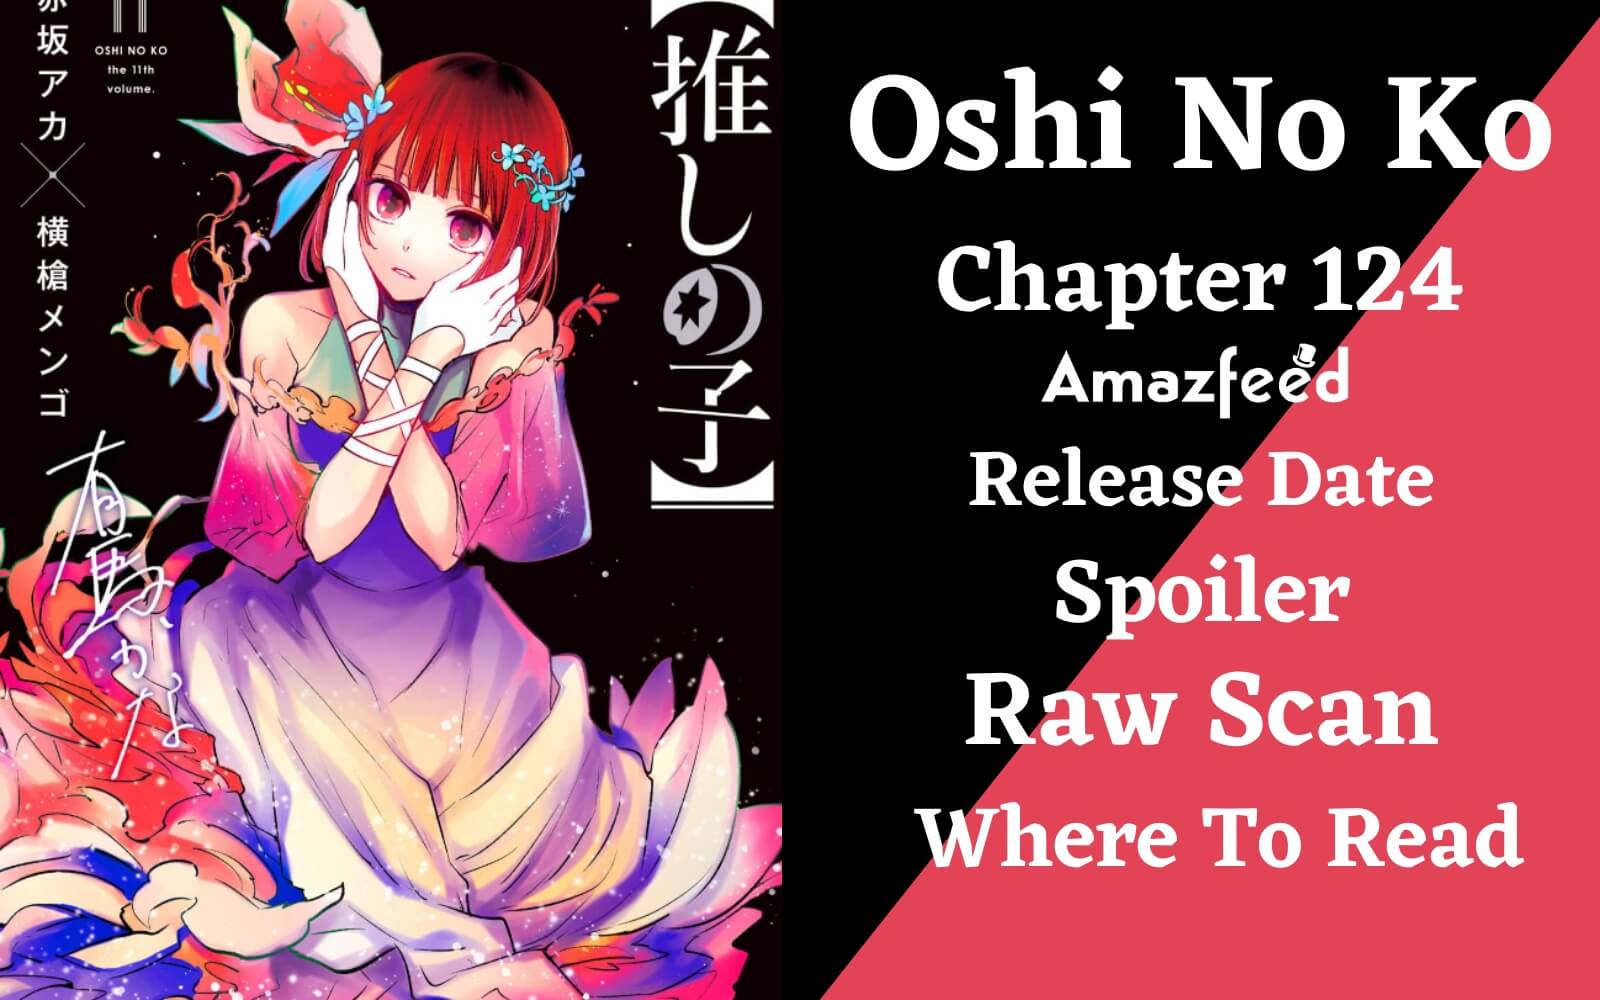 Oshi no Ko chapter 123: Oshi no Ko Chapter 123: Release Date, time, plot  and all you need to Know - The Economic Times